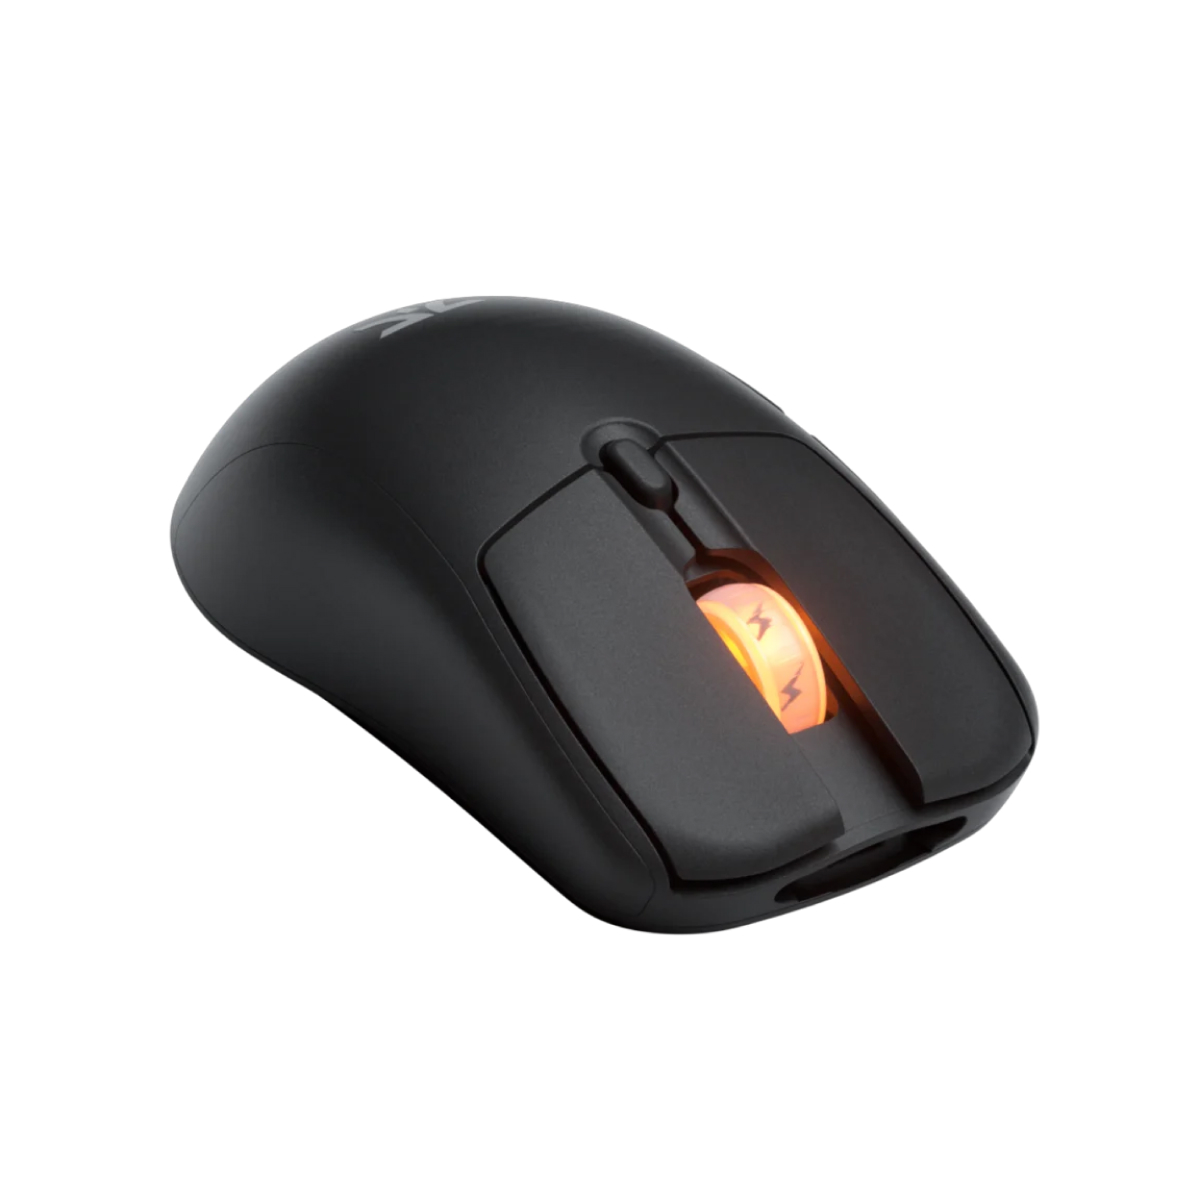 Fnatic - Fnatic Bolt Wireless RGB Optical Gaming Mouse - Black (MS0003-001)